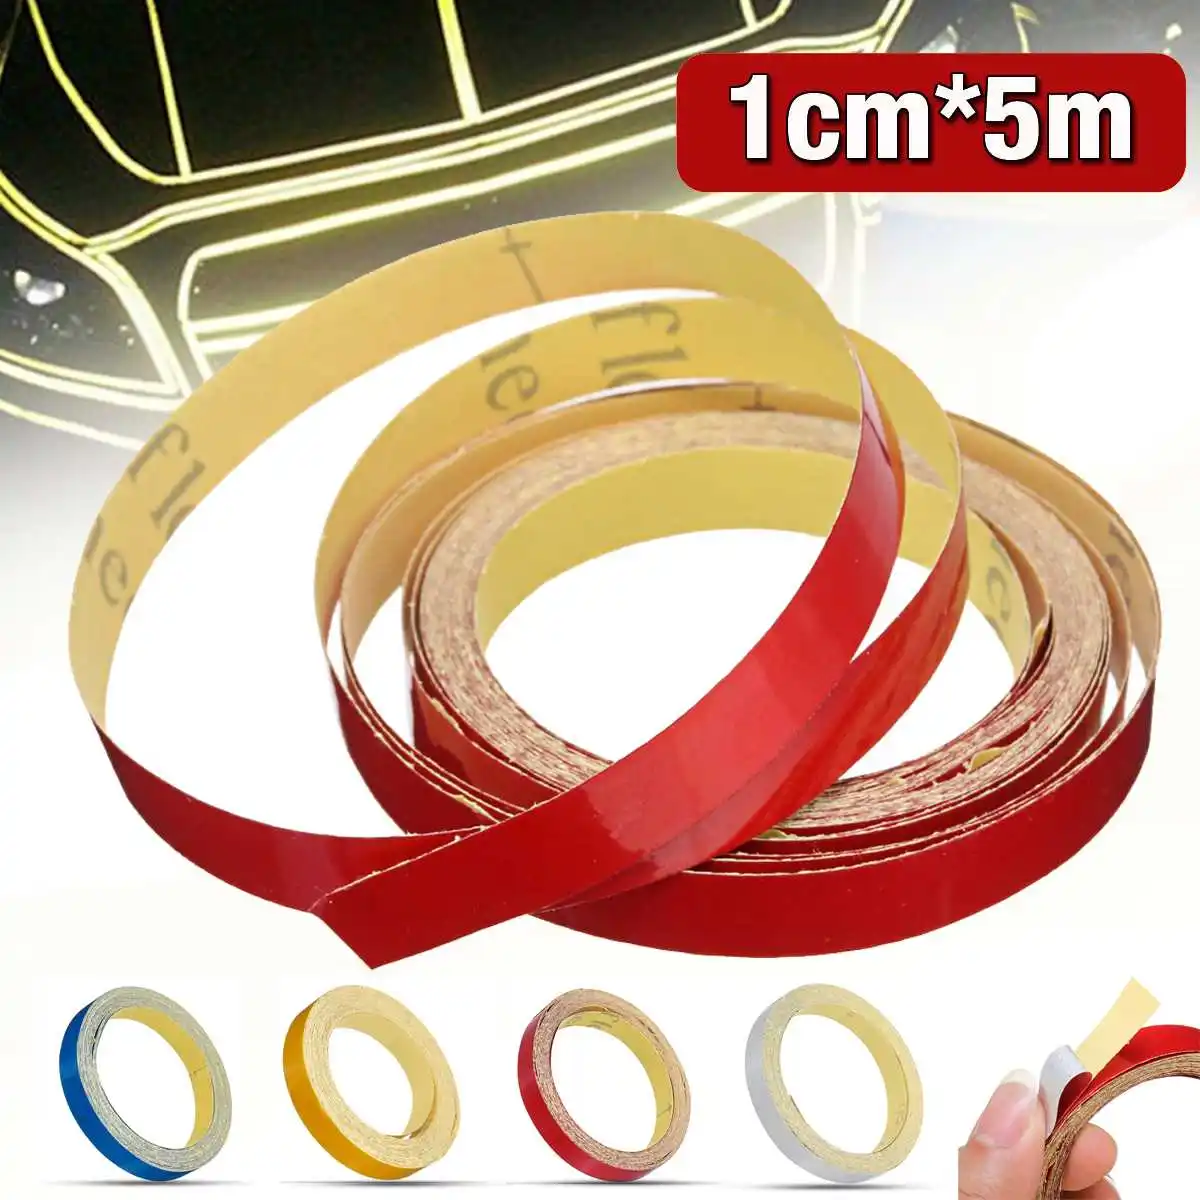 

1cm*5m Glossy Motorcycle Helmet Reflective Decorative Safety Tape DIY Sticker Decal Roll Strip Motorcycle Auto Car Reflector Tap